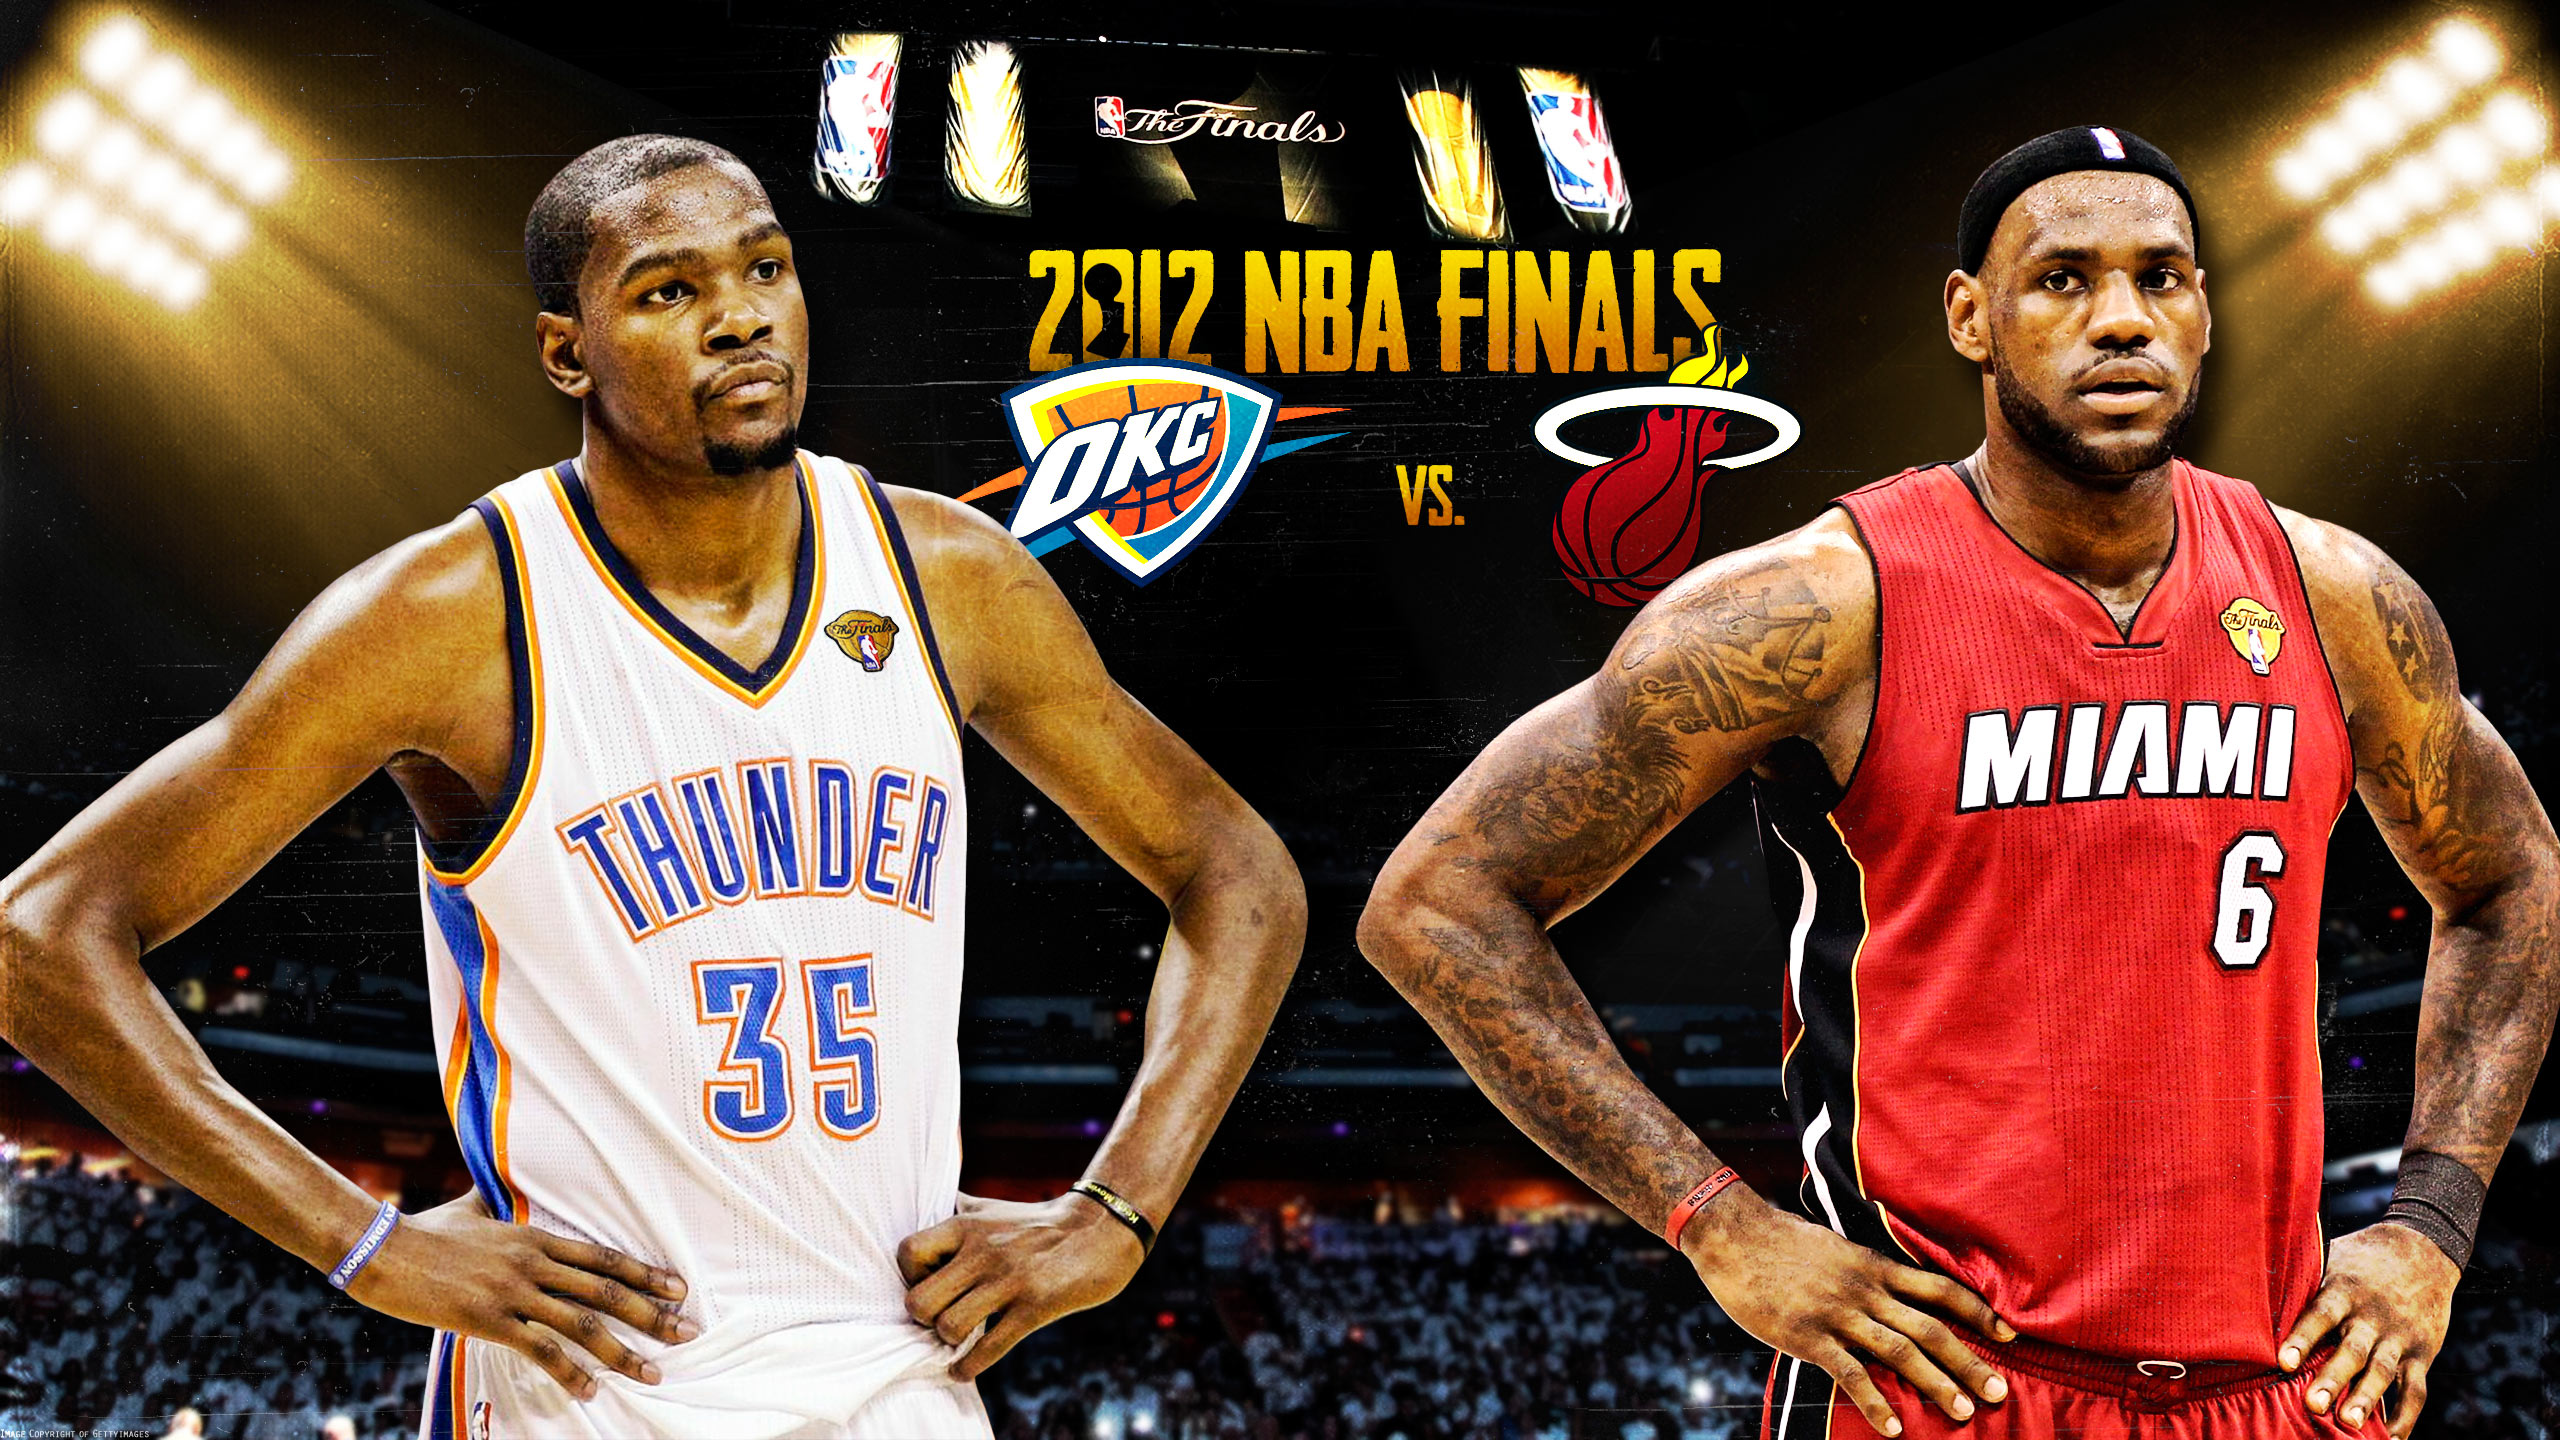 http://www.basketwallpapers.com/Images-11/Durant-James-2012-NBA-Finals-2560x1440-Wallpaper-BasketWallpapers.com-.jpg